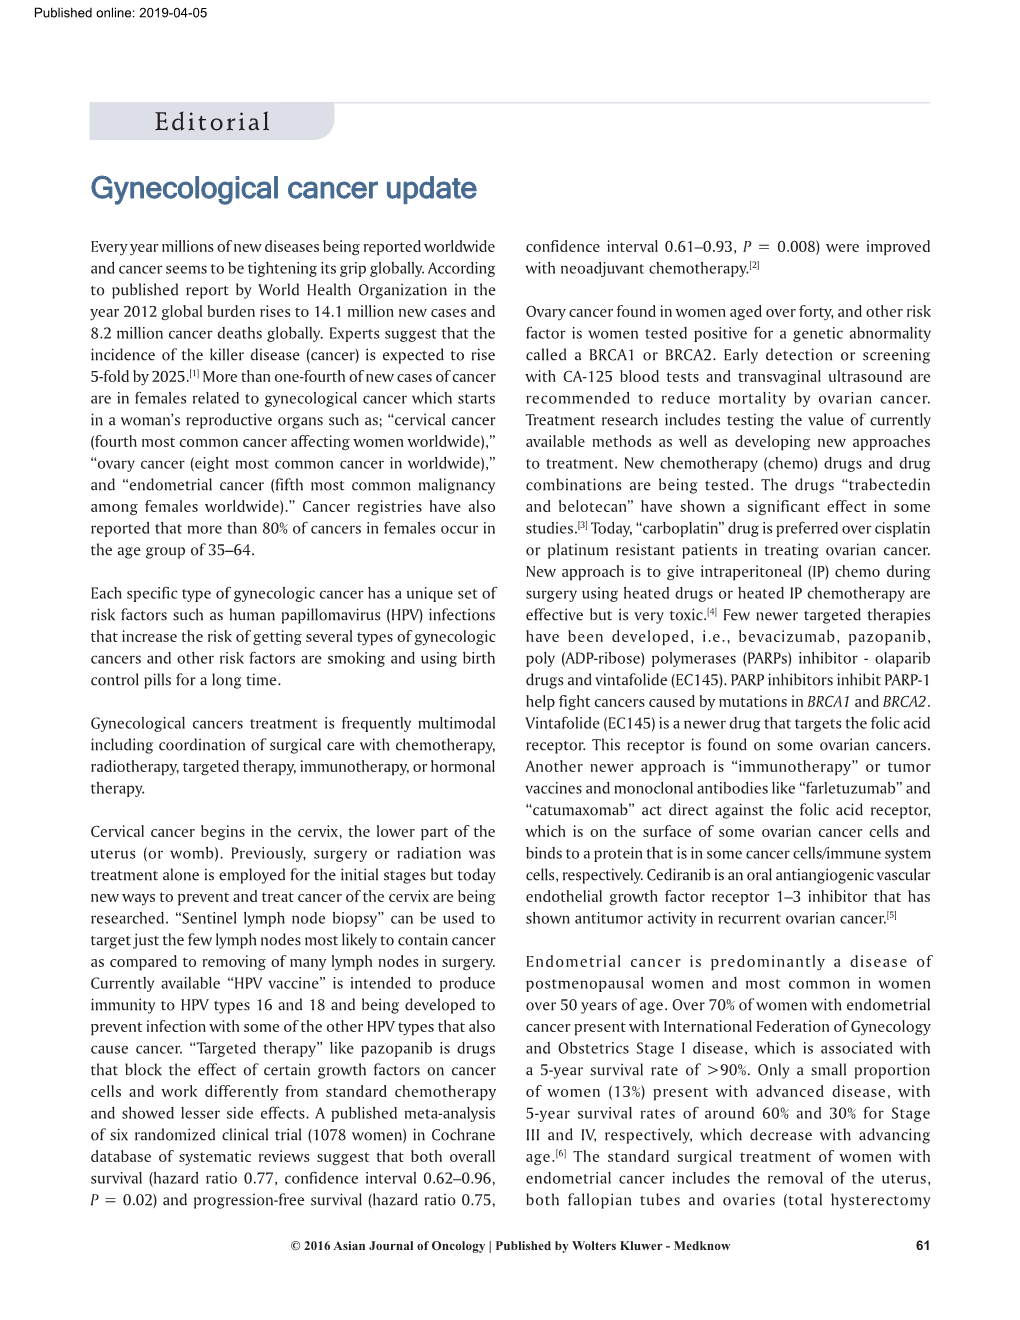 Gynecological Cancer Update